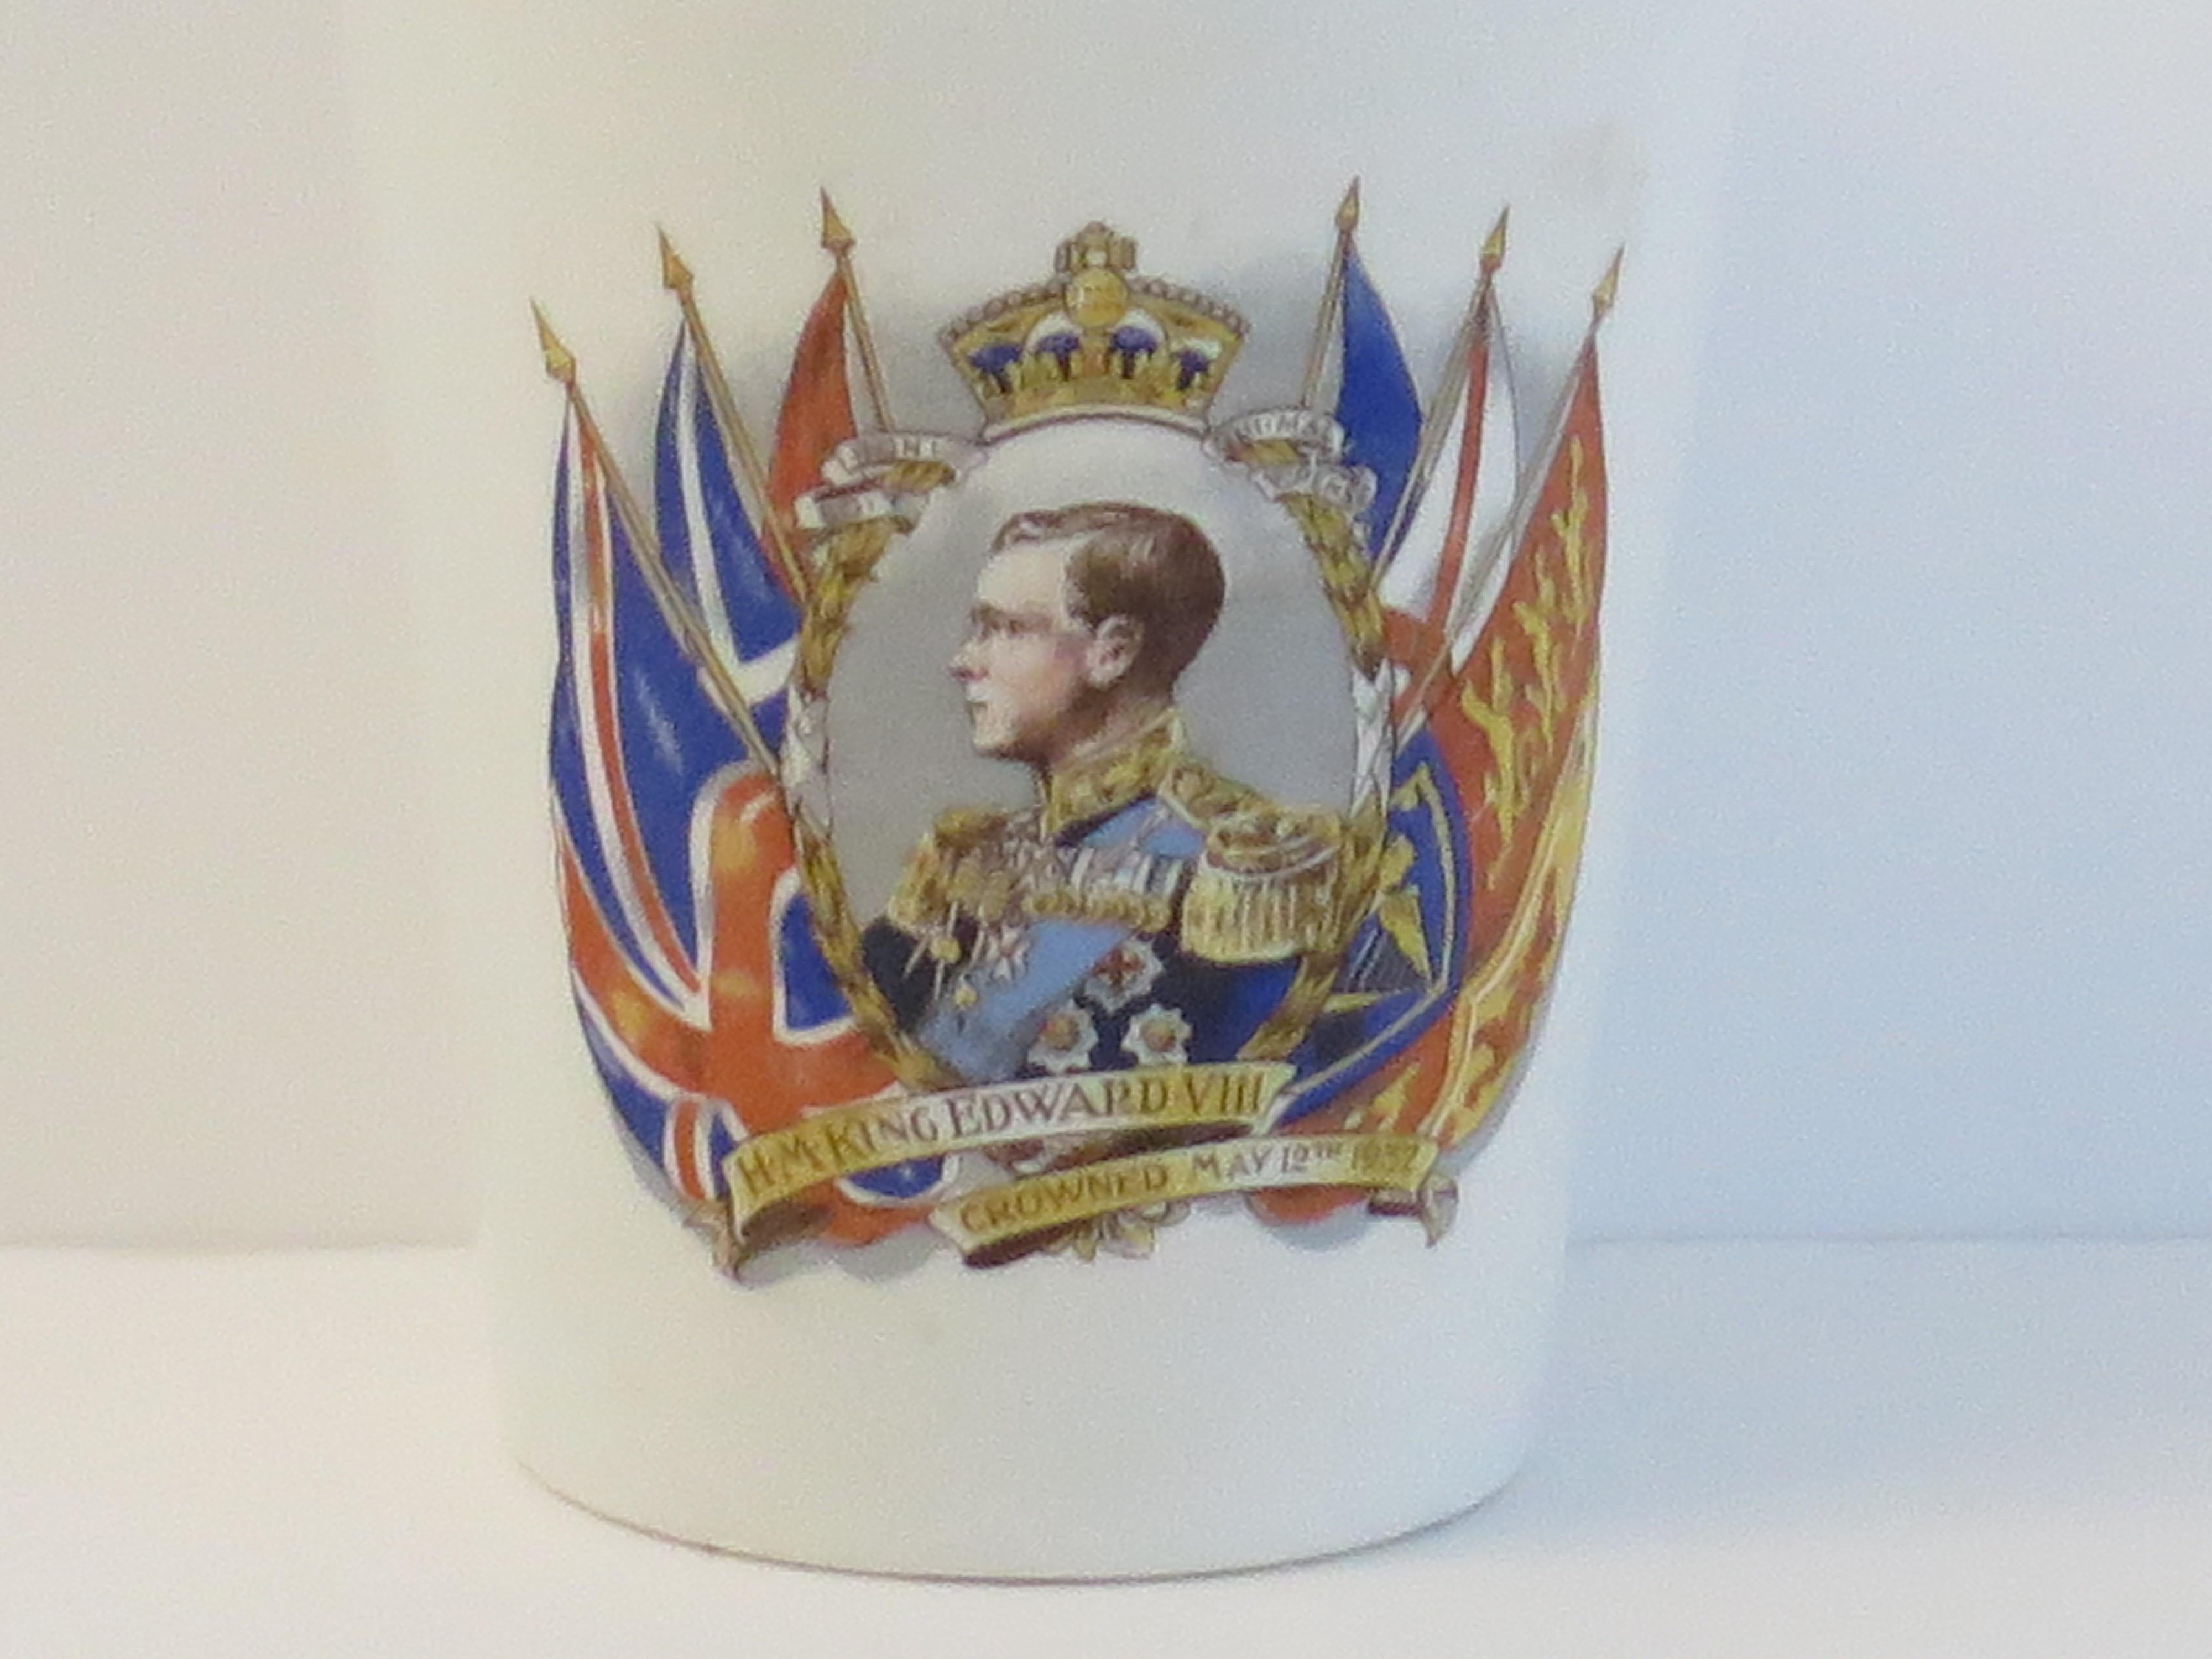 This is a royal commemorative earthenware (pottery) beaker celebrating the planned coronation of King Edward V111th on May 12th 1937.

The tapering beaker or cup would have been made by one of the many Staffordshire potteries in England during the